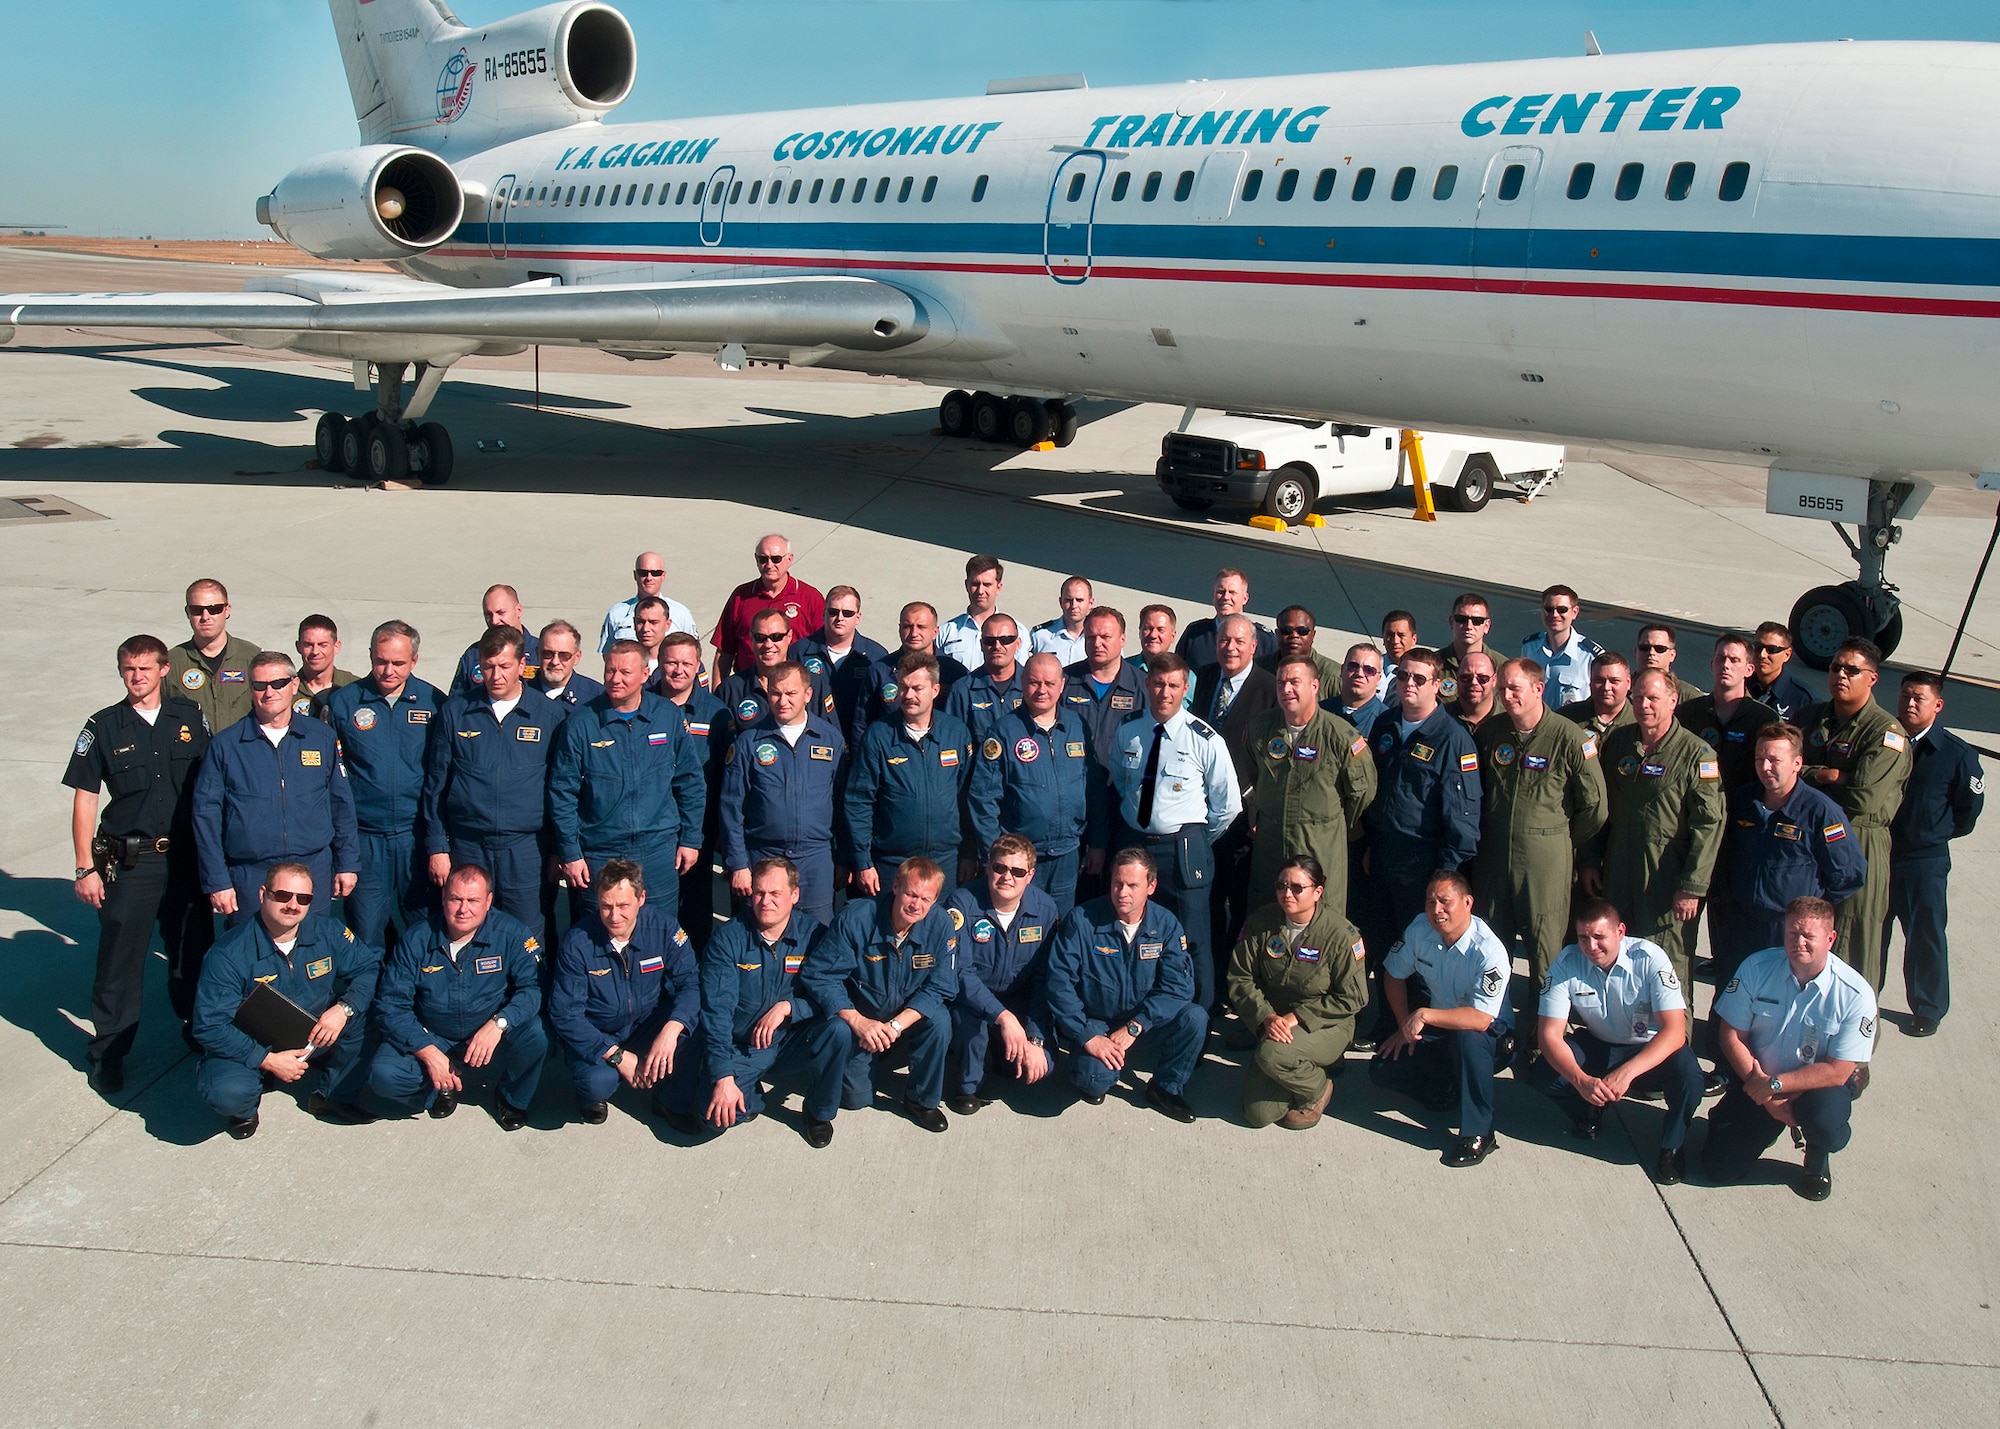 Travis Airmen Russian air force members pose for a photo Oct. 12, 2012, after landing at Travis Air Force Base, Calif. for an Open Skies visit. Open Skies is to promote openess, transparency and confidence amongst the member nations. (U.S. Air Force photo/T.C. Perkins)